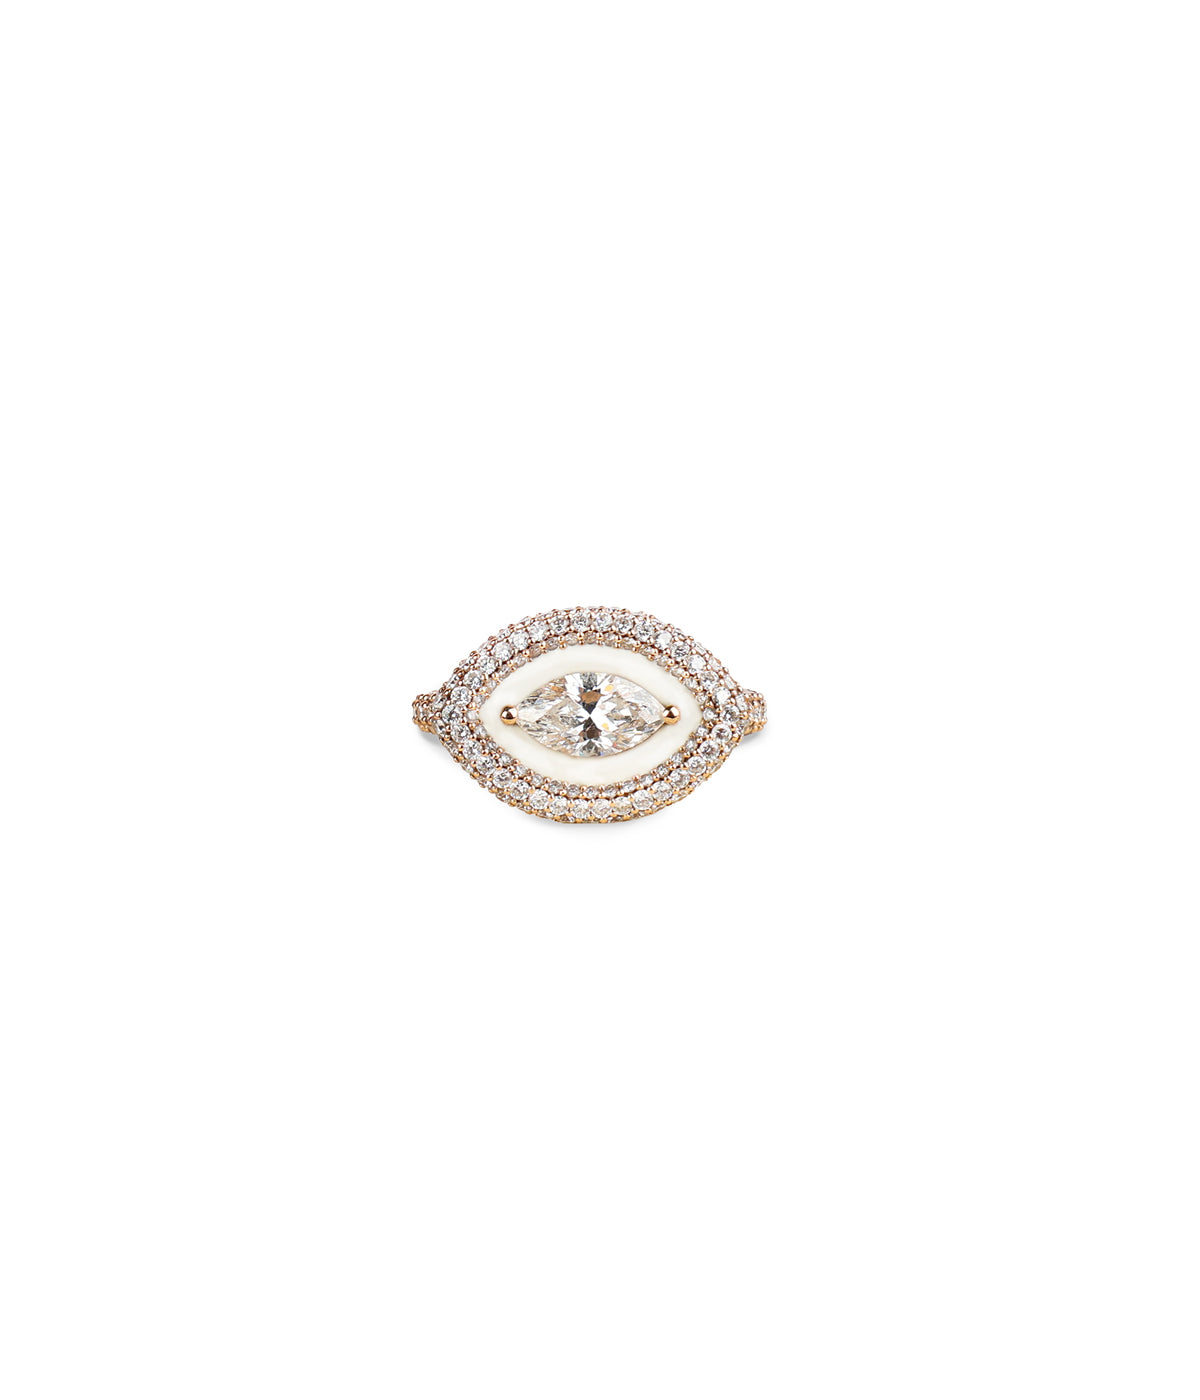 Marquise 18k rose gold, diamond and enamel pinky ring